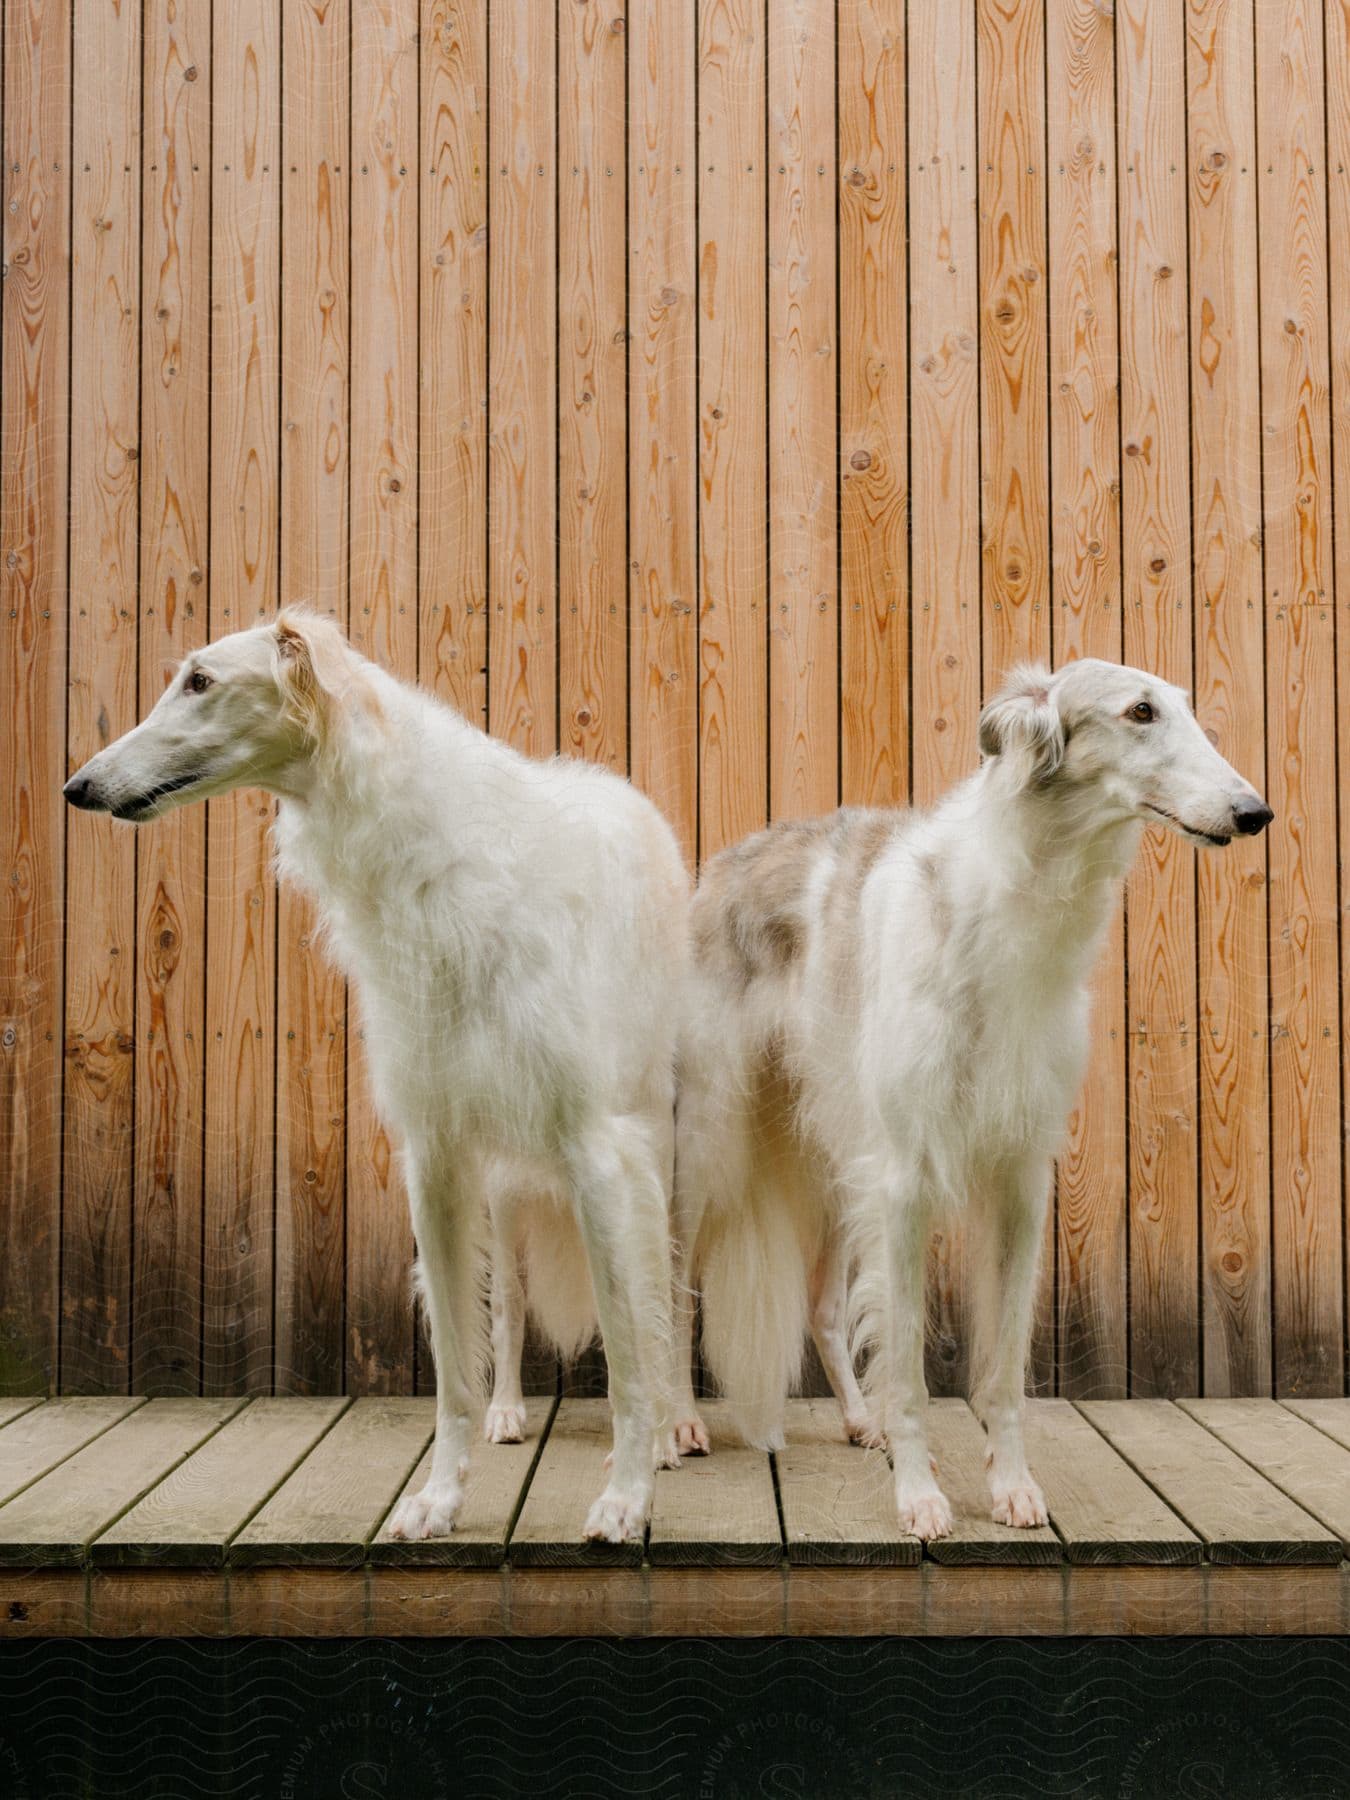 Two white dogs on a wooden deck in front of a wood fence